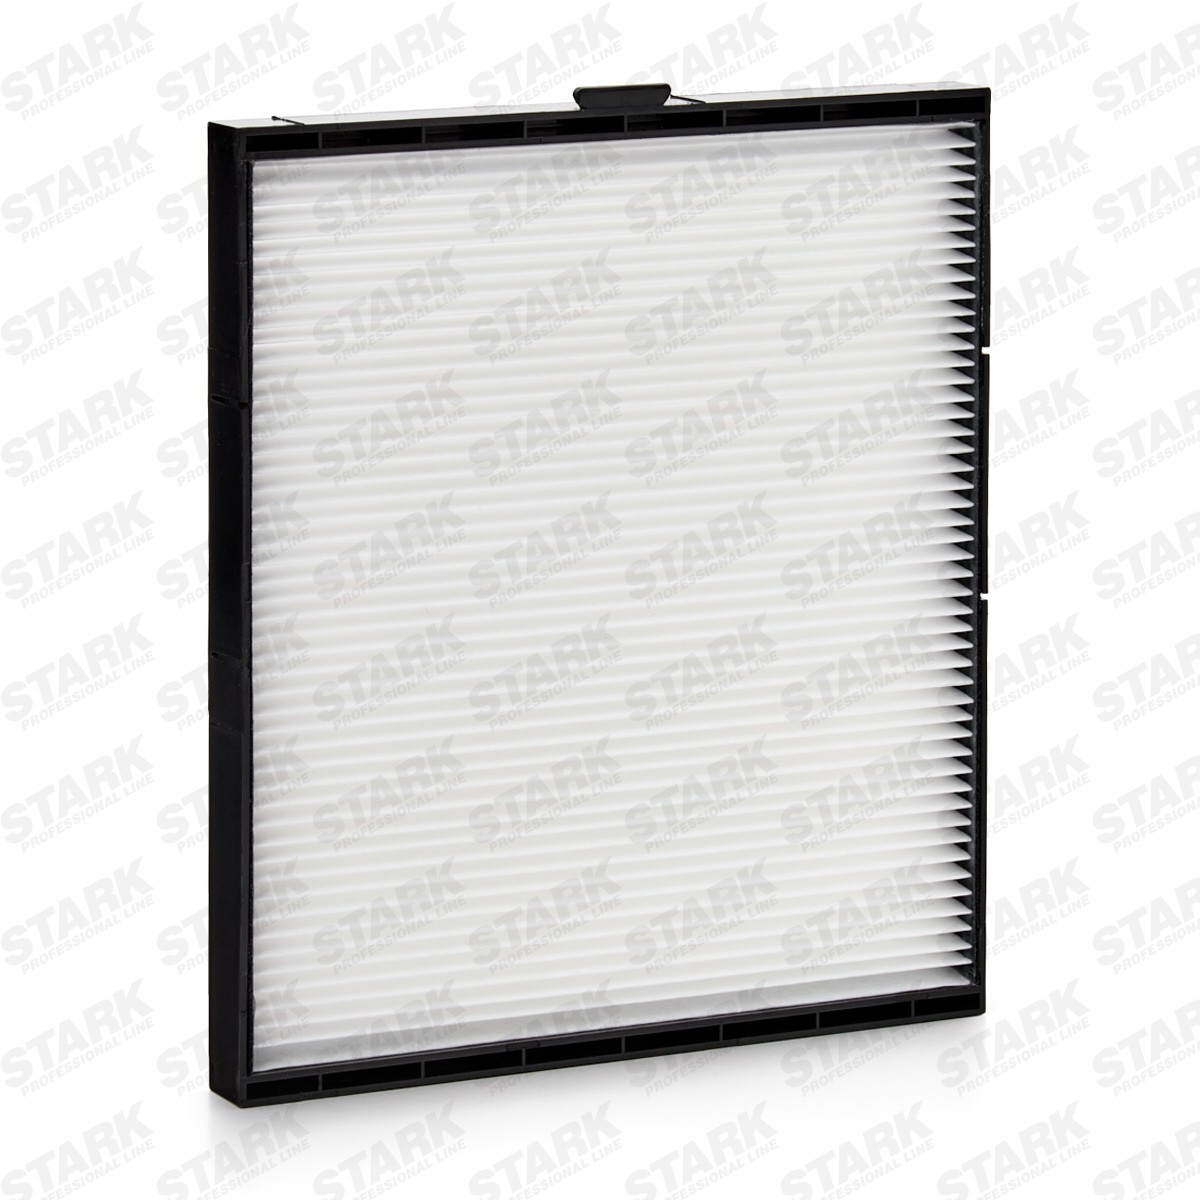 SKIF-0170165 Air con filter SKIF-0170165 STARK Particulate Filter, 267 mm x 222 mm x 21 mm